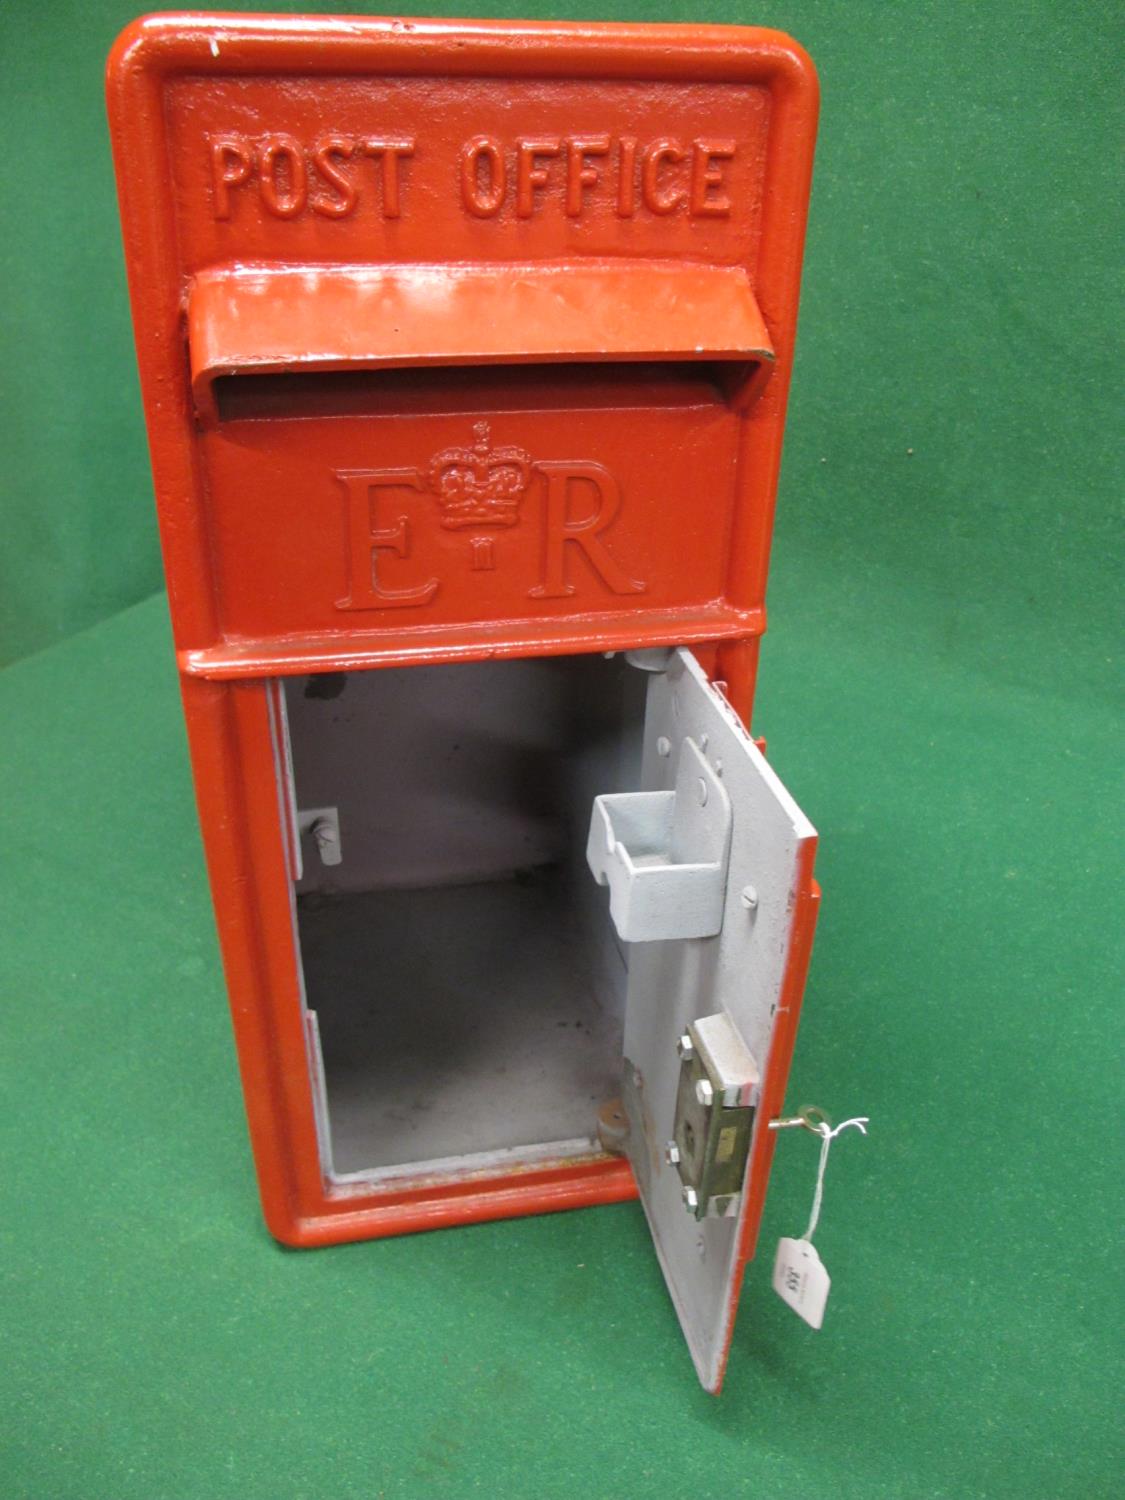 Reproduction iron and steel full size ER post box with key, for wall or post mounting - 10" x 24" - Image 3 of 3